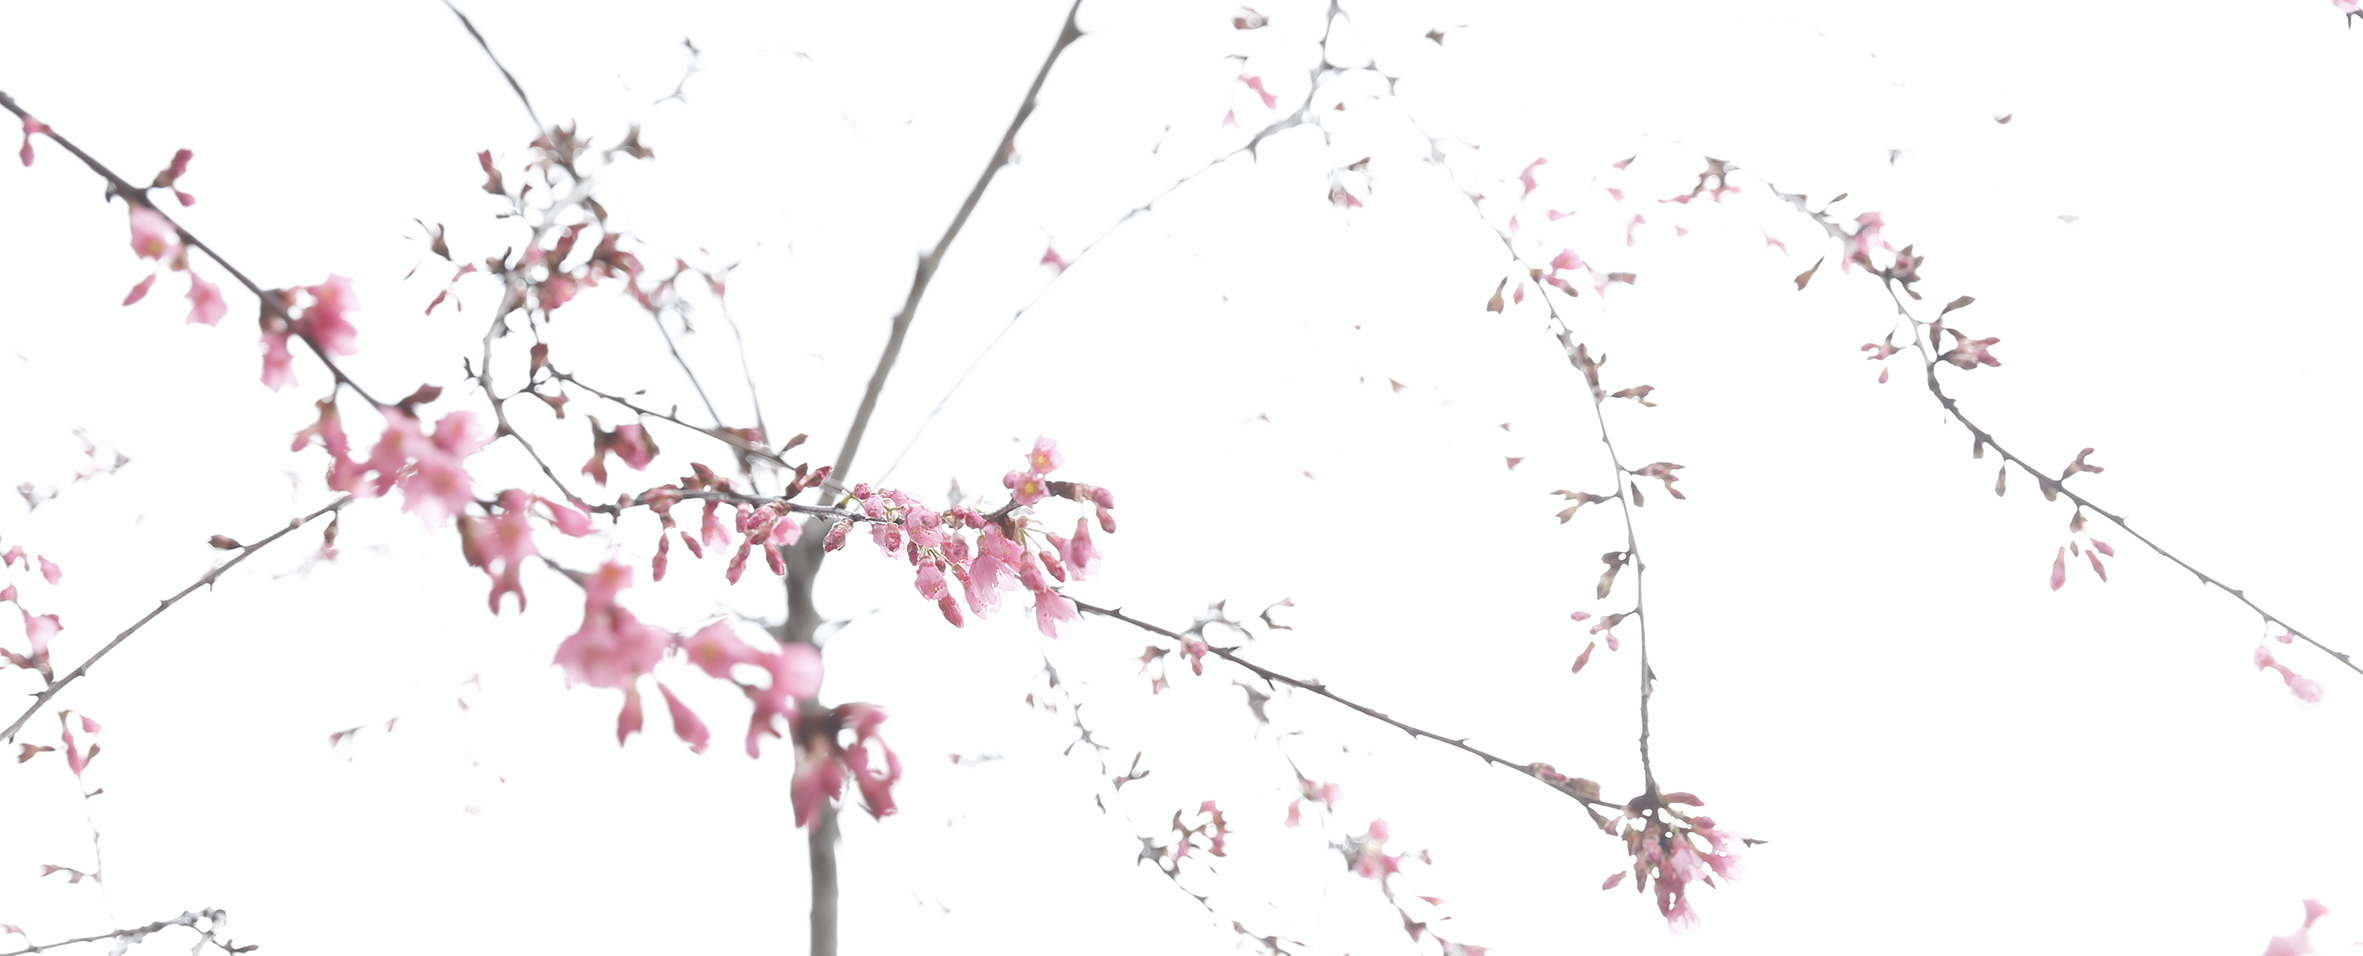 Branches with Blossom